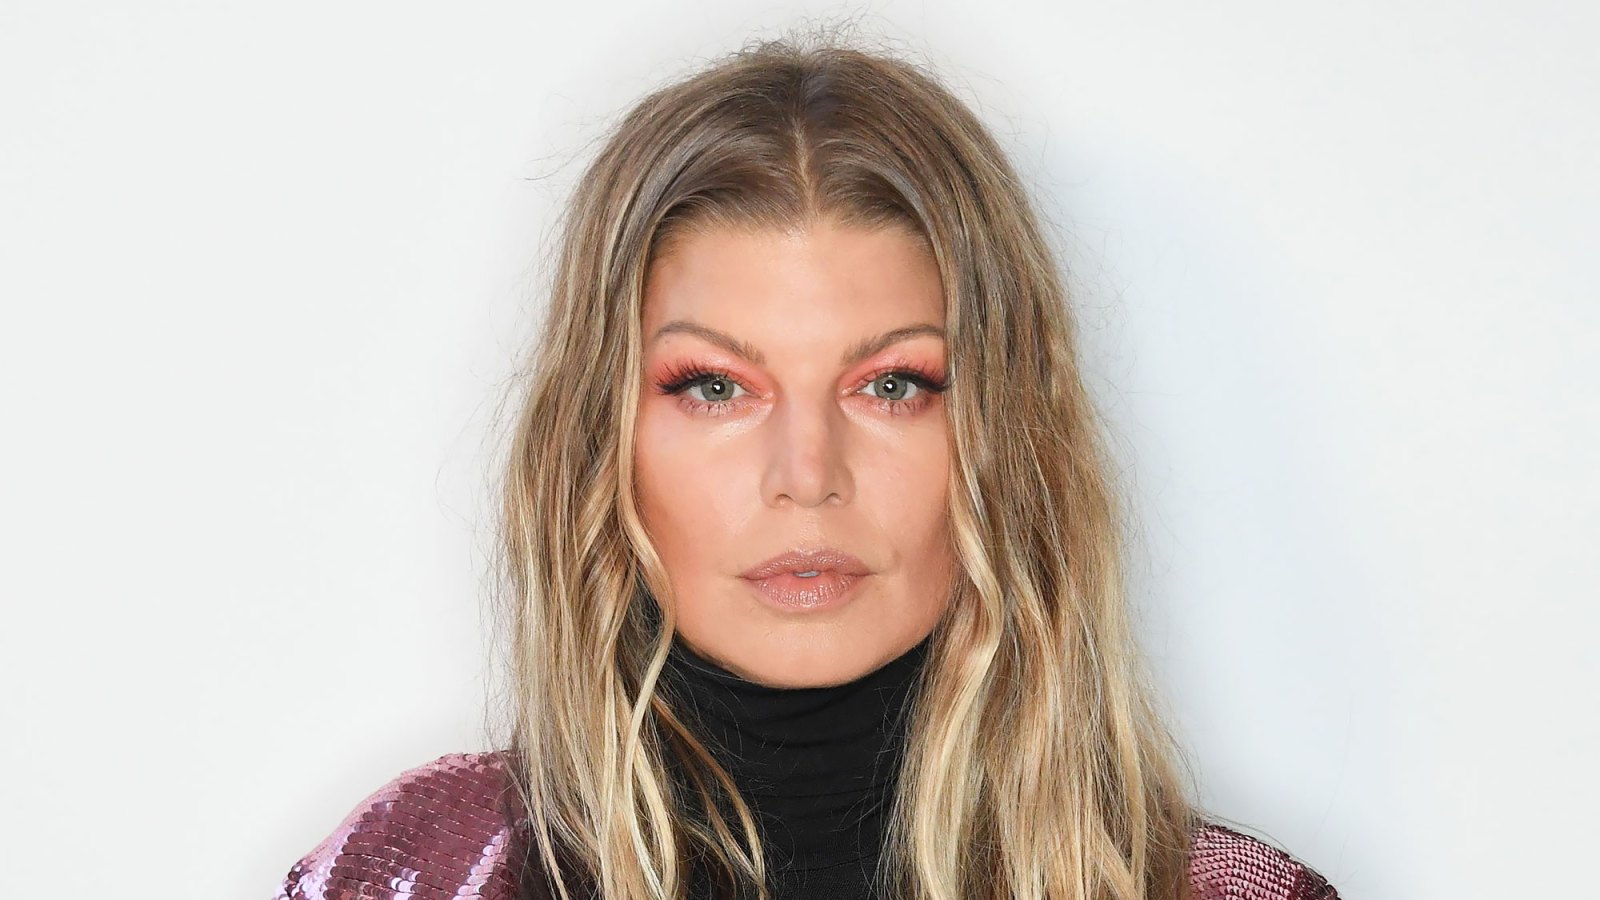 Why Fergie Is No Longer Involved With Black Eyed Peas: ‘She’s Focusing on Being a Mom’